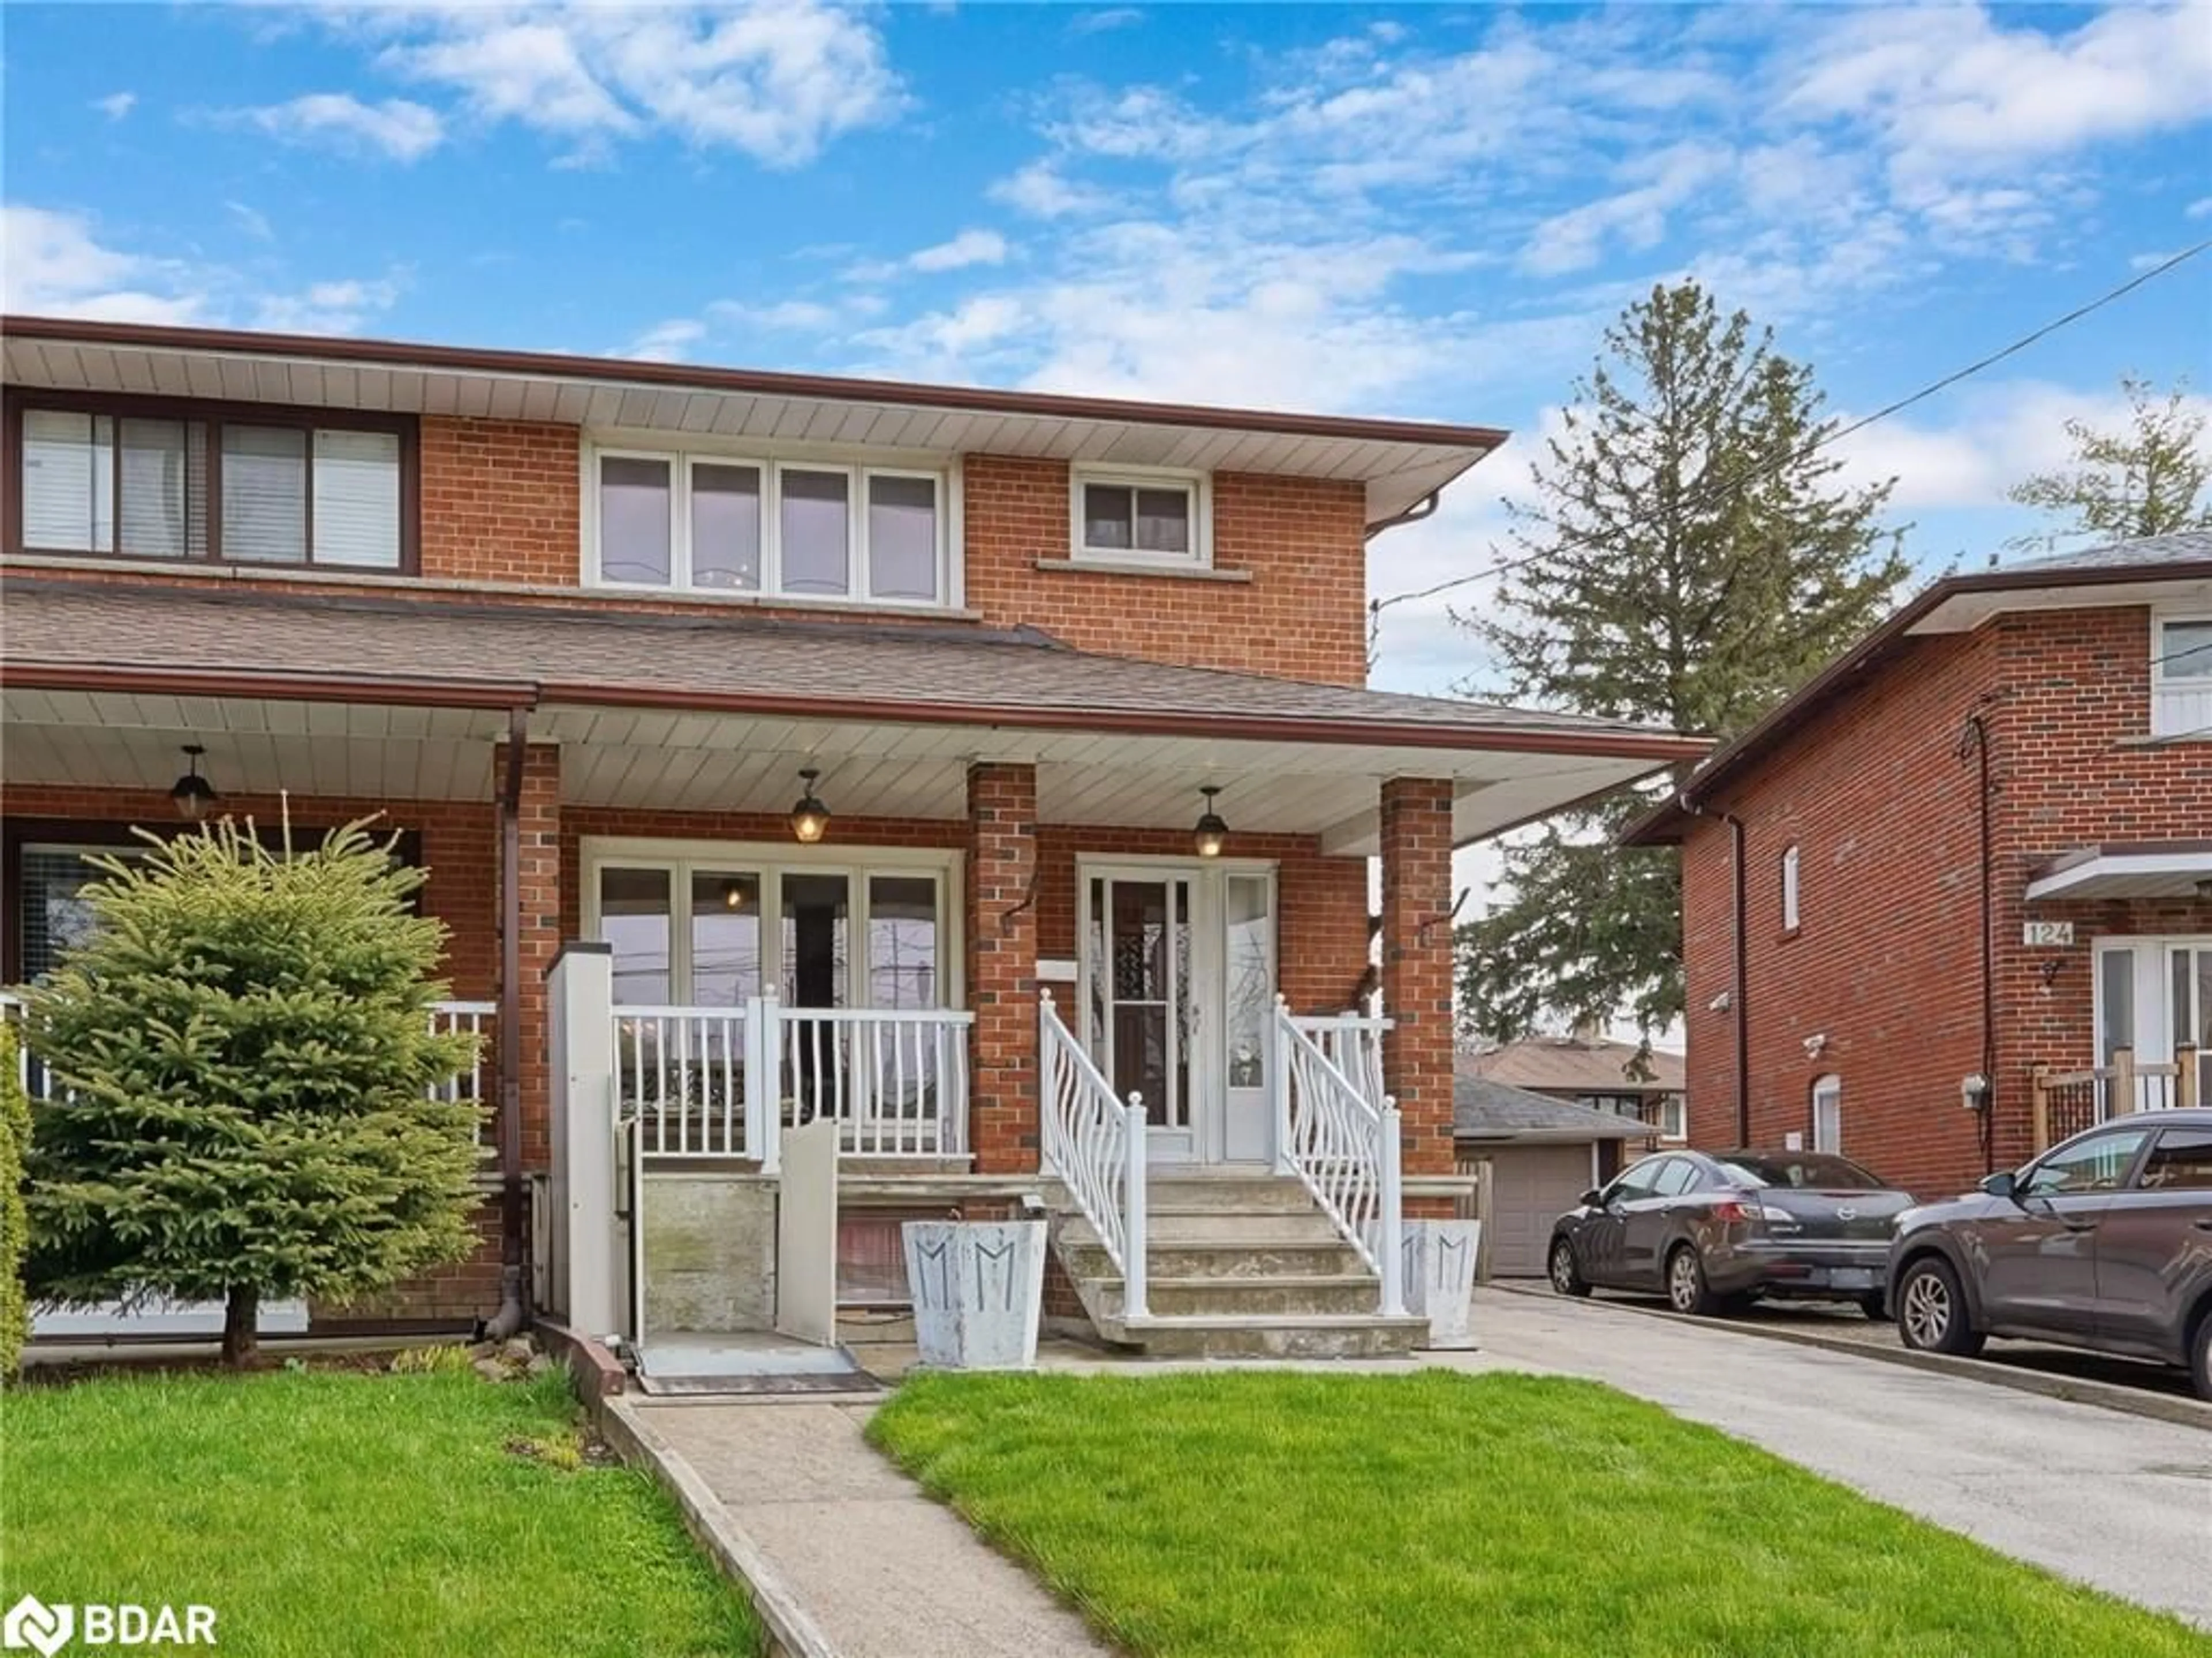 Home with brick exterior material for 122 Brookhaven Dr, Toronto Ontario M6M 4P2